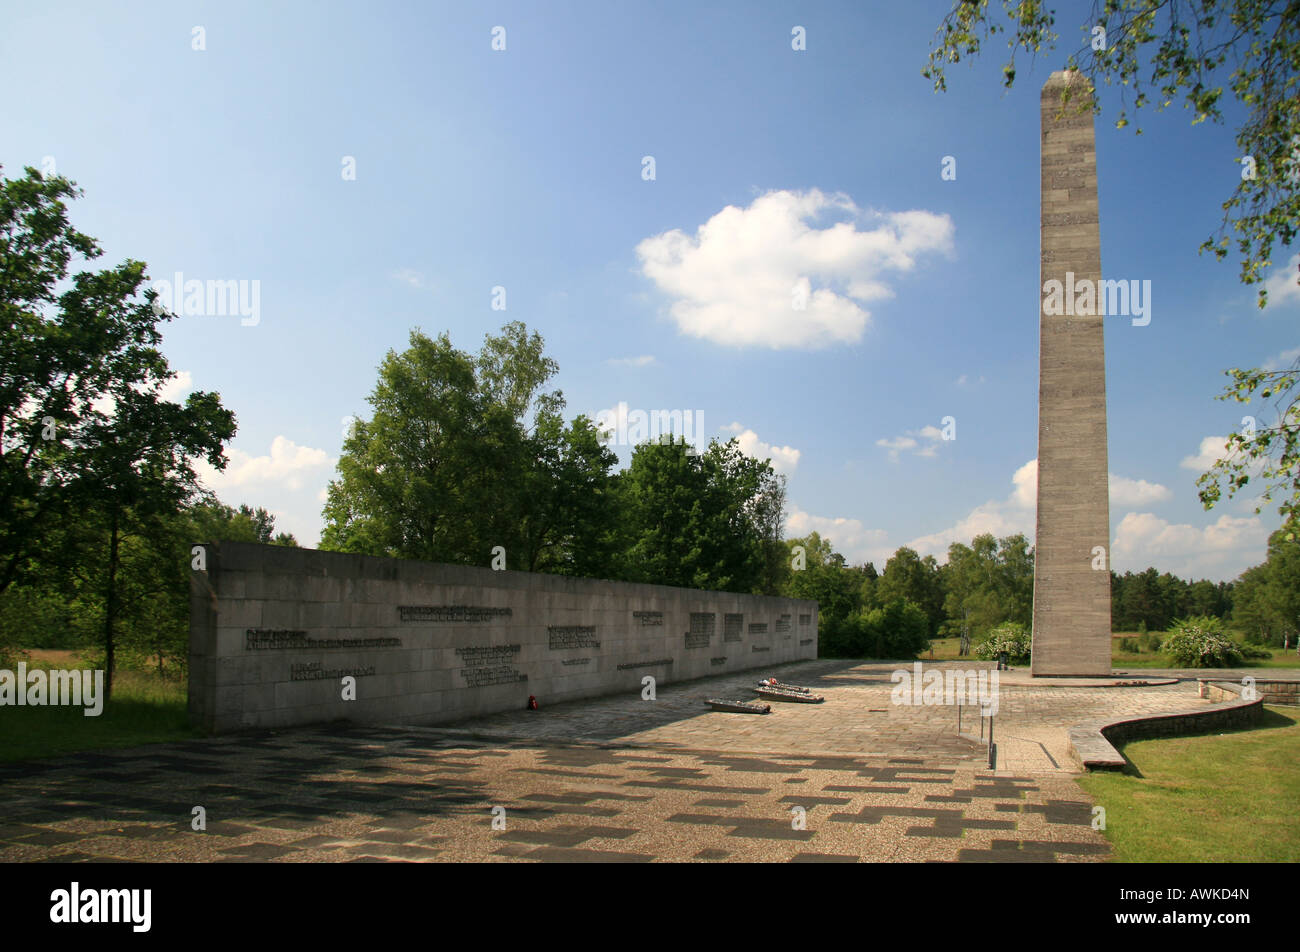 The Obelisk and Inscription Wall in the main memorial area of the former Nazi concentration camp at Bergen Belsen, Germany. Stock Photo